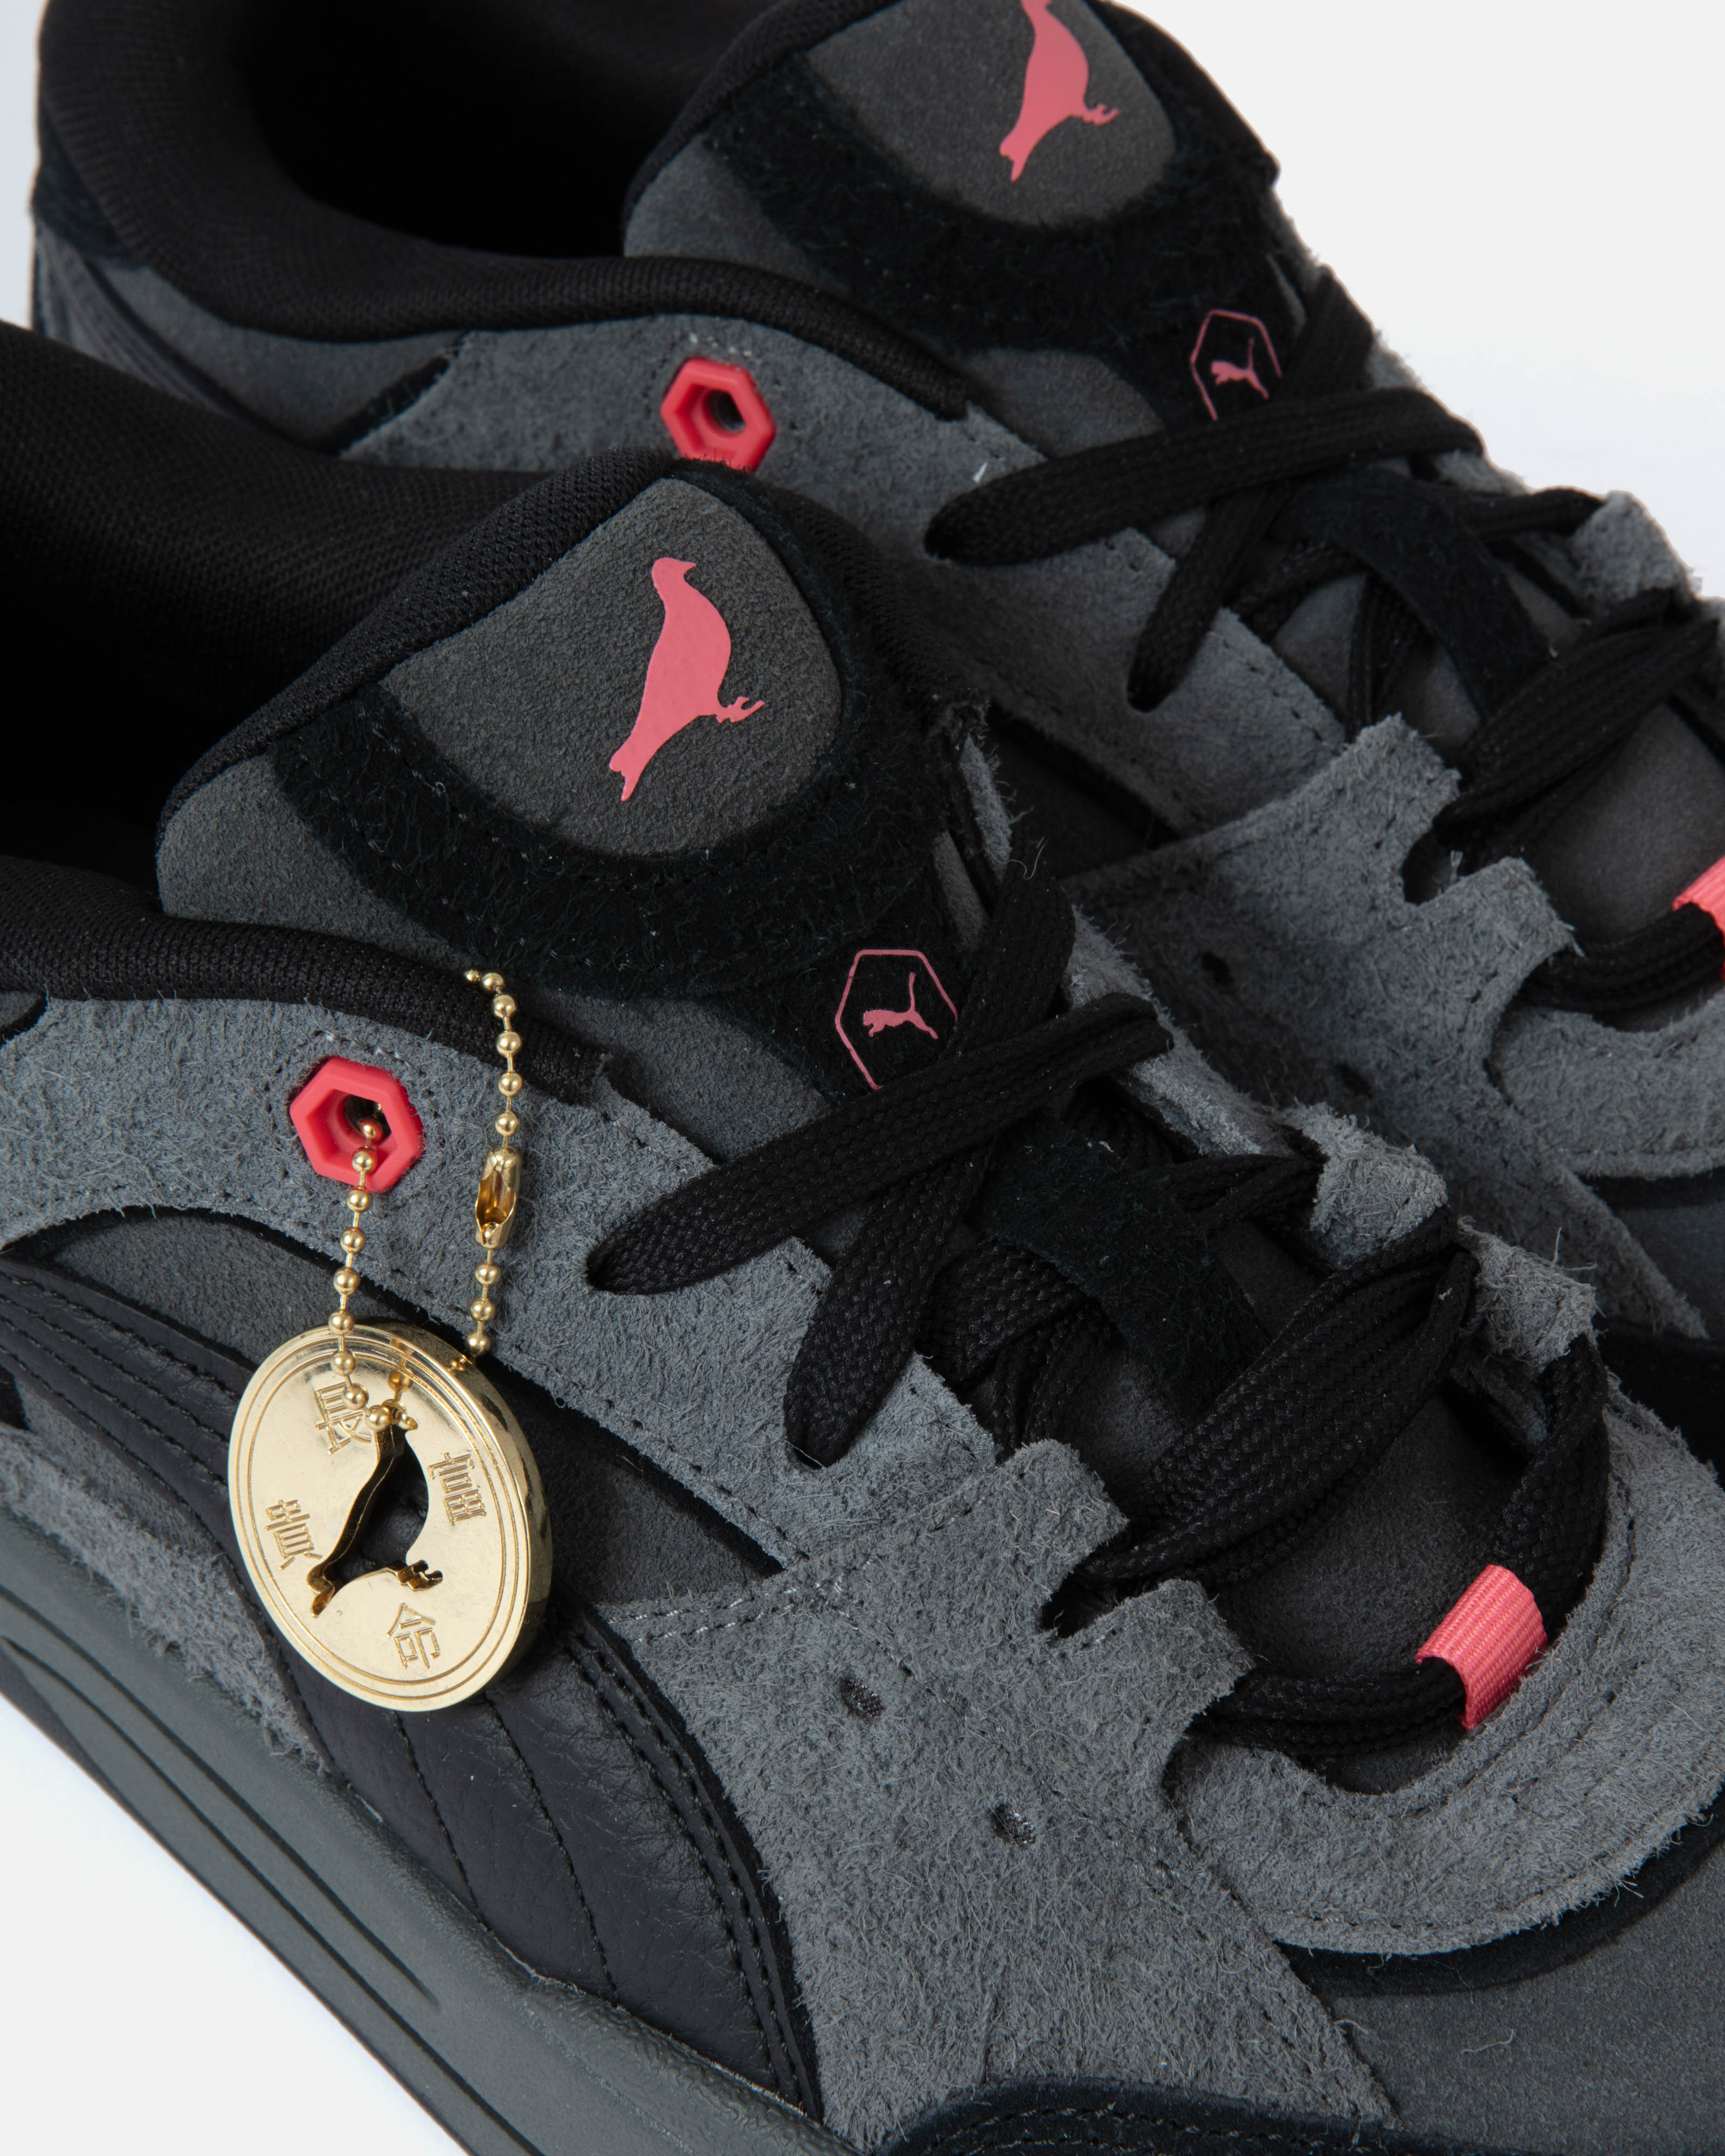 Puma x Staple 180 Year of the Dragon - Shoes | Staple Pigeon